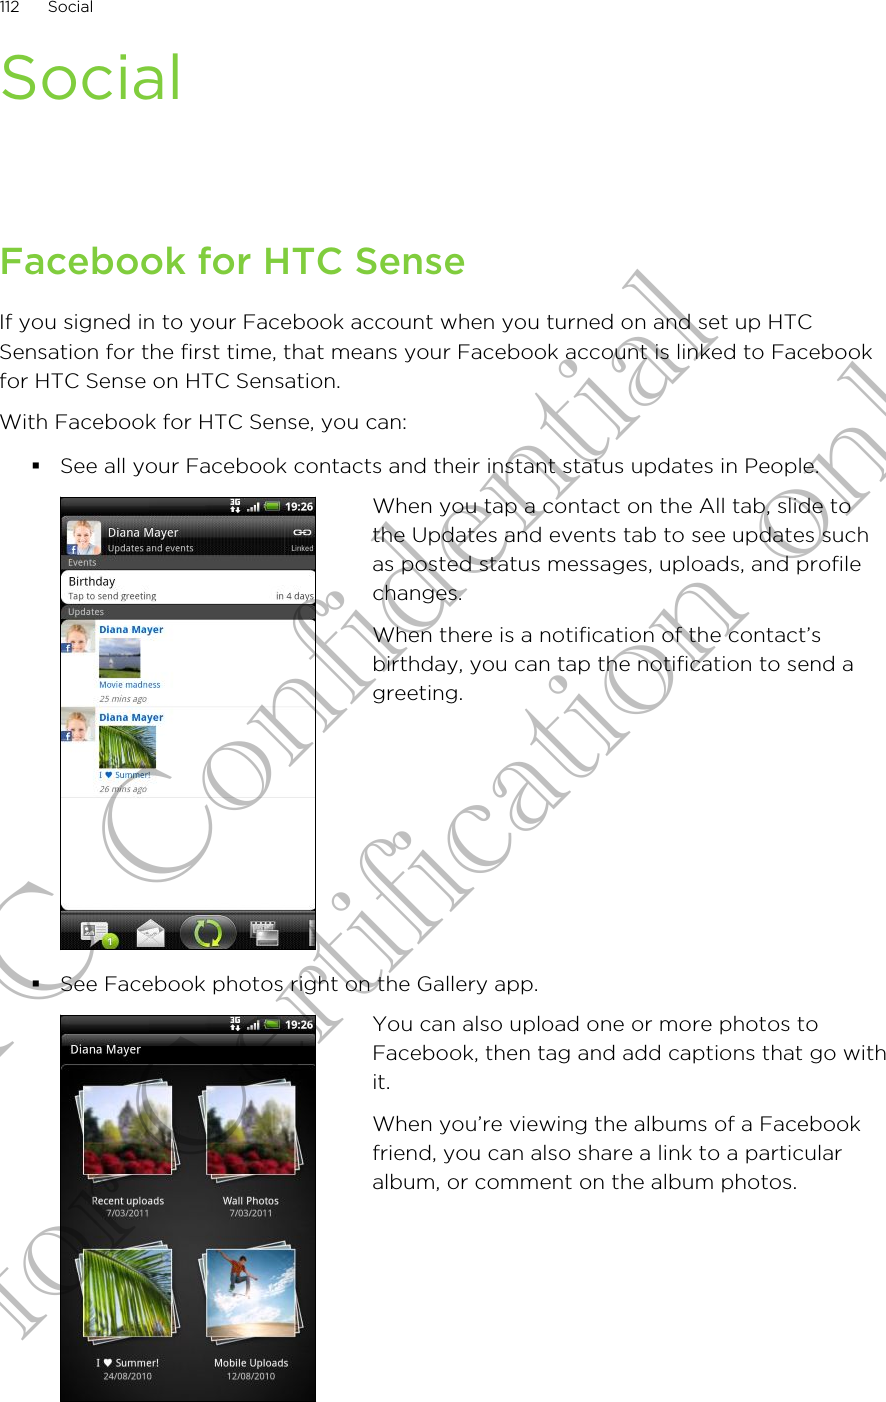 SocialFacebook for HTC SenseIf you signed in to your Facebook account when you turned on and set up HTCSensation for the first time, that means your Facebook account is linked to Facebookfor HTC Sense on HTC Sensation.With Facebook for HTC Sense, you can:§See all your Facebook contacts and their instant status updates in People.When you tap a contact on the All tab, slide tothe Updates and events tab to see updates suchas posted status messages, uploads, and profilechanges.When there is a notification of the contact’sbirthday, you can tap the notification to send agreeting.§See Facebook photos right on the Gallery app.You can also upload one or more photos toFacebook, then tag and add captions that go withit.When you’re viewing the albums of a Facebookfriend, you can also share a link to a particularalbum, or comment on the album photos.112 SocialHTC Confidential for Certification only